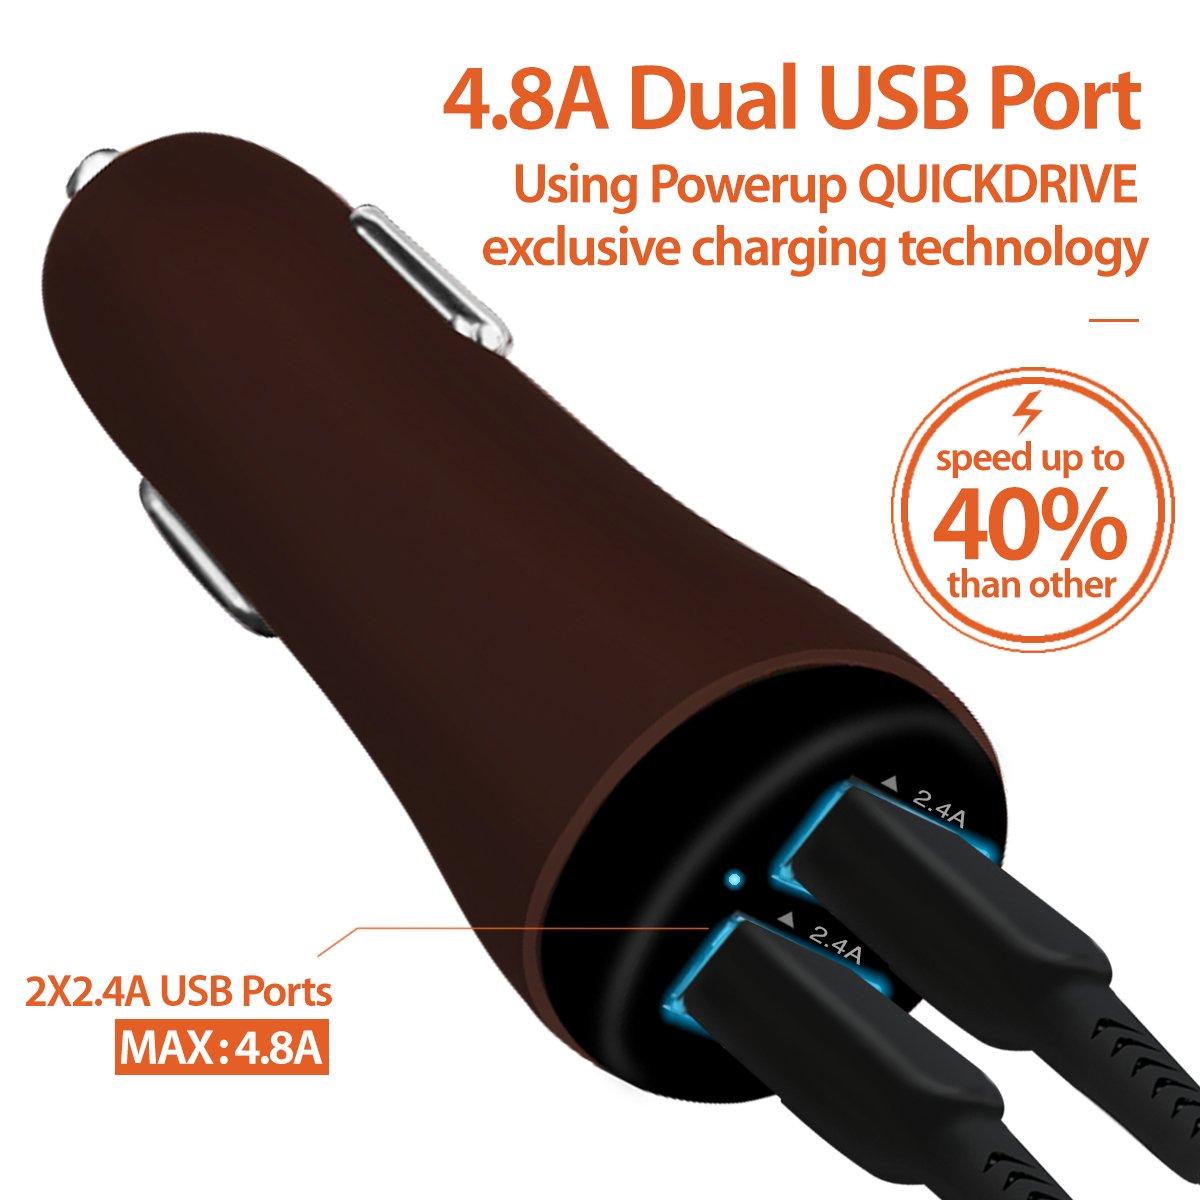 Powerup Quick Drive 4.8a Car Charger 24w 2usb Port Ultra Sleek Rubber Finish - Brown